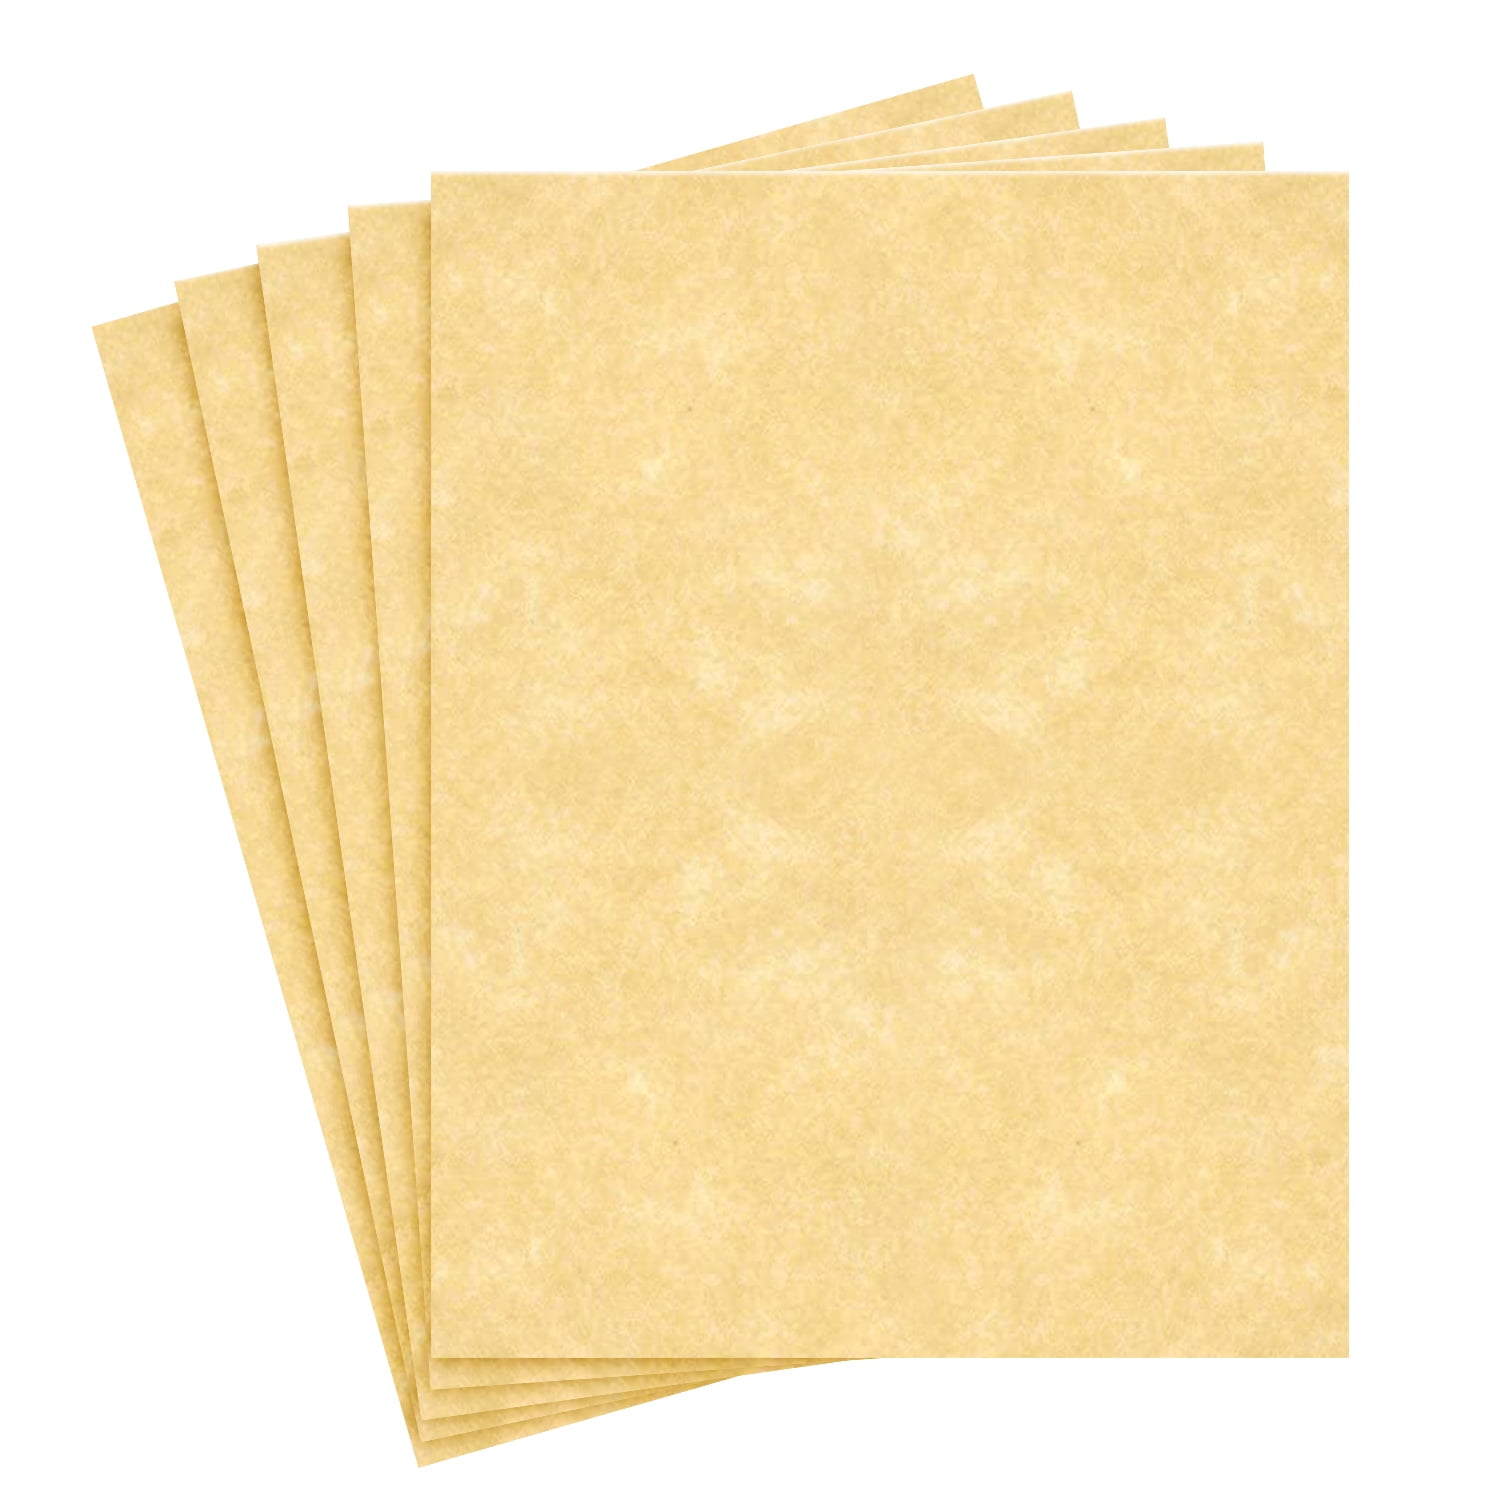 Natural Stationery Parchment Paper - Great for Writing, Certificates, Menus  and Wedding Invitations, 24lb Bond Paper, 8.5 x 11